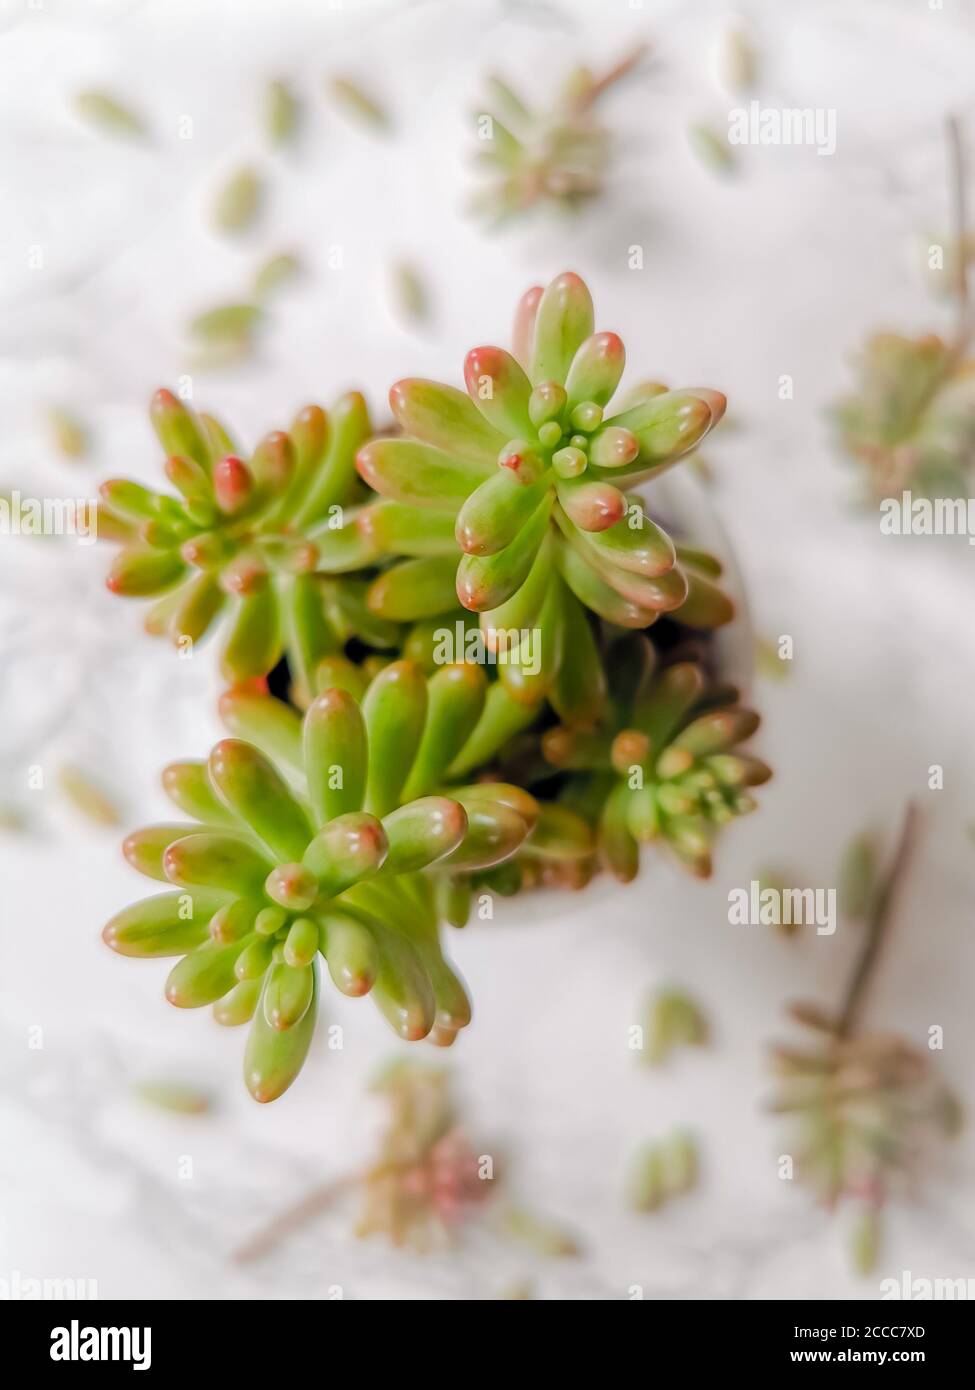 Jelly beans plant or sedum rubrotinctum aurora plant and cuttings on a white background Stock Photo